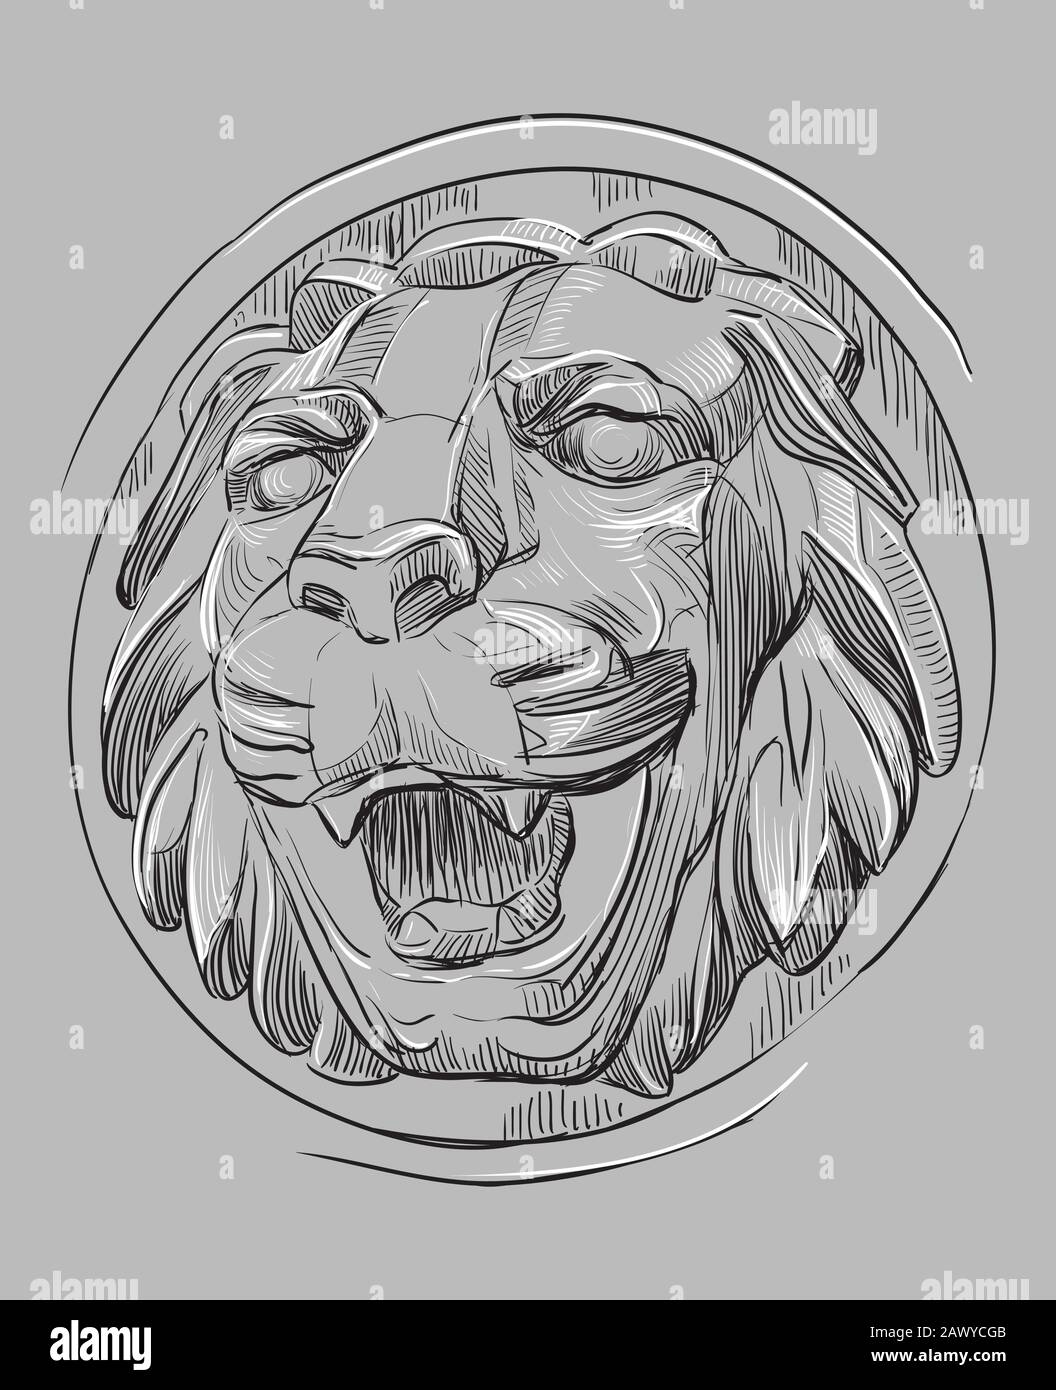 Ancient stone bas-relief in the form of a lion's head with open mouth, vector hand drawing illustration in black and white colors isolated on grey bac Stock Vector